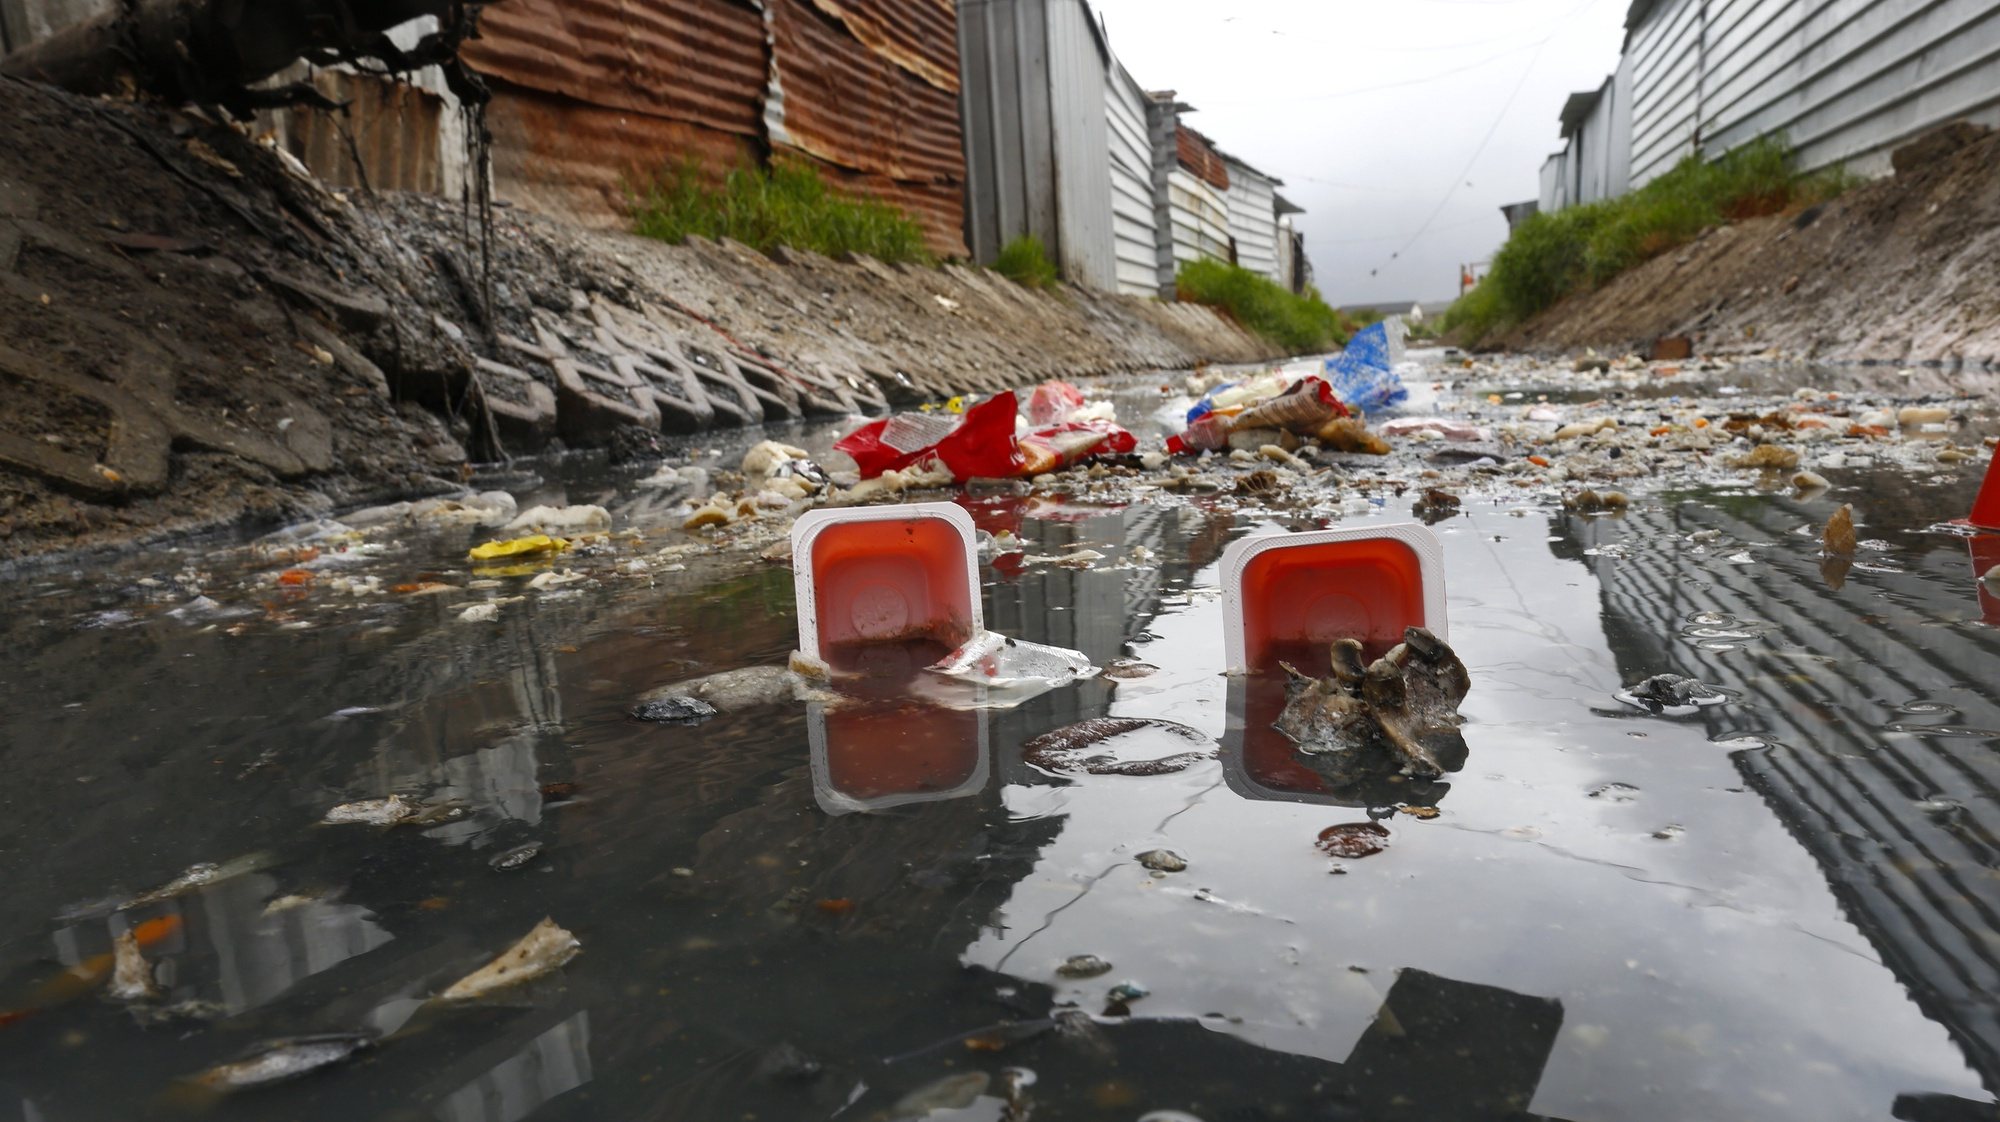 epa06602747 A general view of garbage in a highly polluted river next to shack homes in Masiphumelele, Cape Town, South Africa, 14 March 2018. Rapid urbanization and a national government that has not provided enough infrastructure in high density neighborhoods like Masiphuumelele are two of the major factors environmentalists cite contributing to the polluting of urban rivers. Environmental activists globally observe on 14 March annually the International Day of Action for Rivers with the aim of raising awareness around issues concerning the world&#039;s water ways.  EPA/NIC BOTHMA